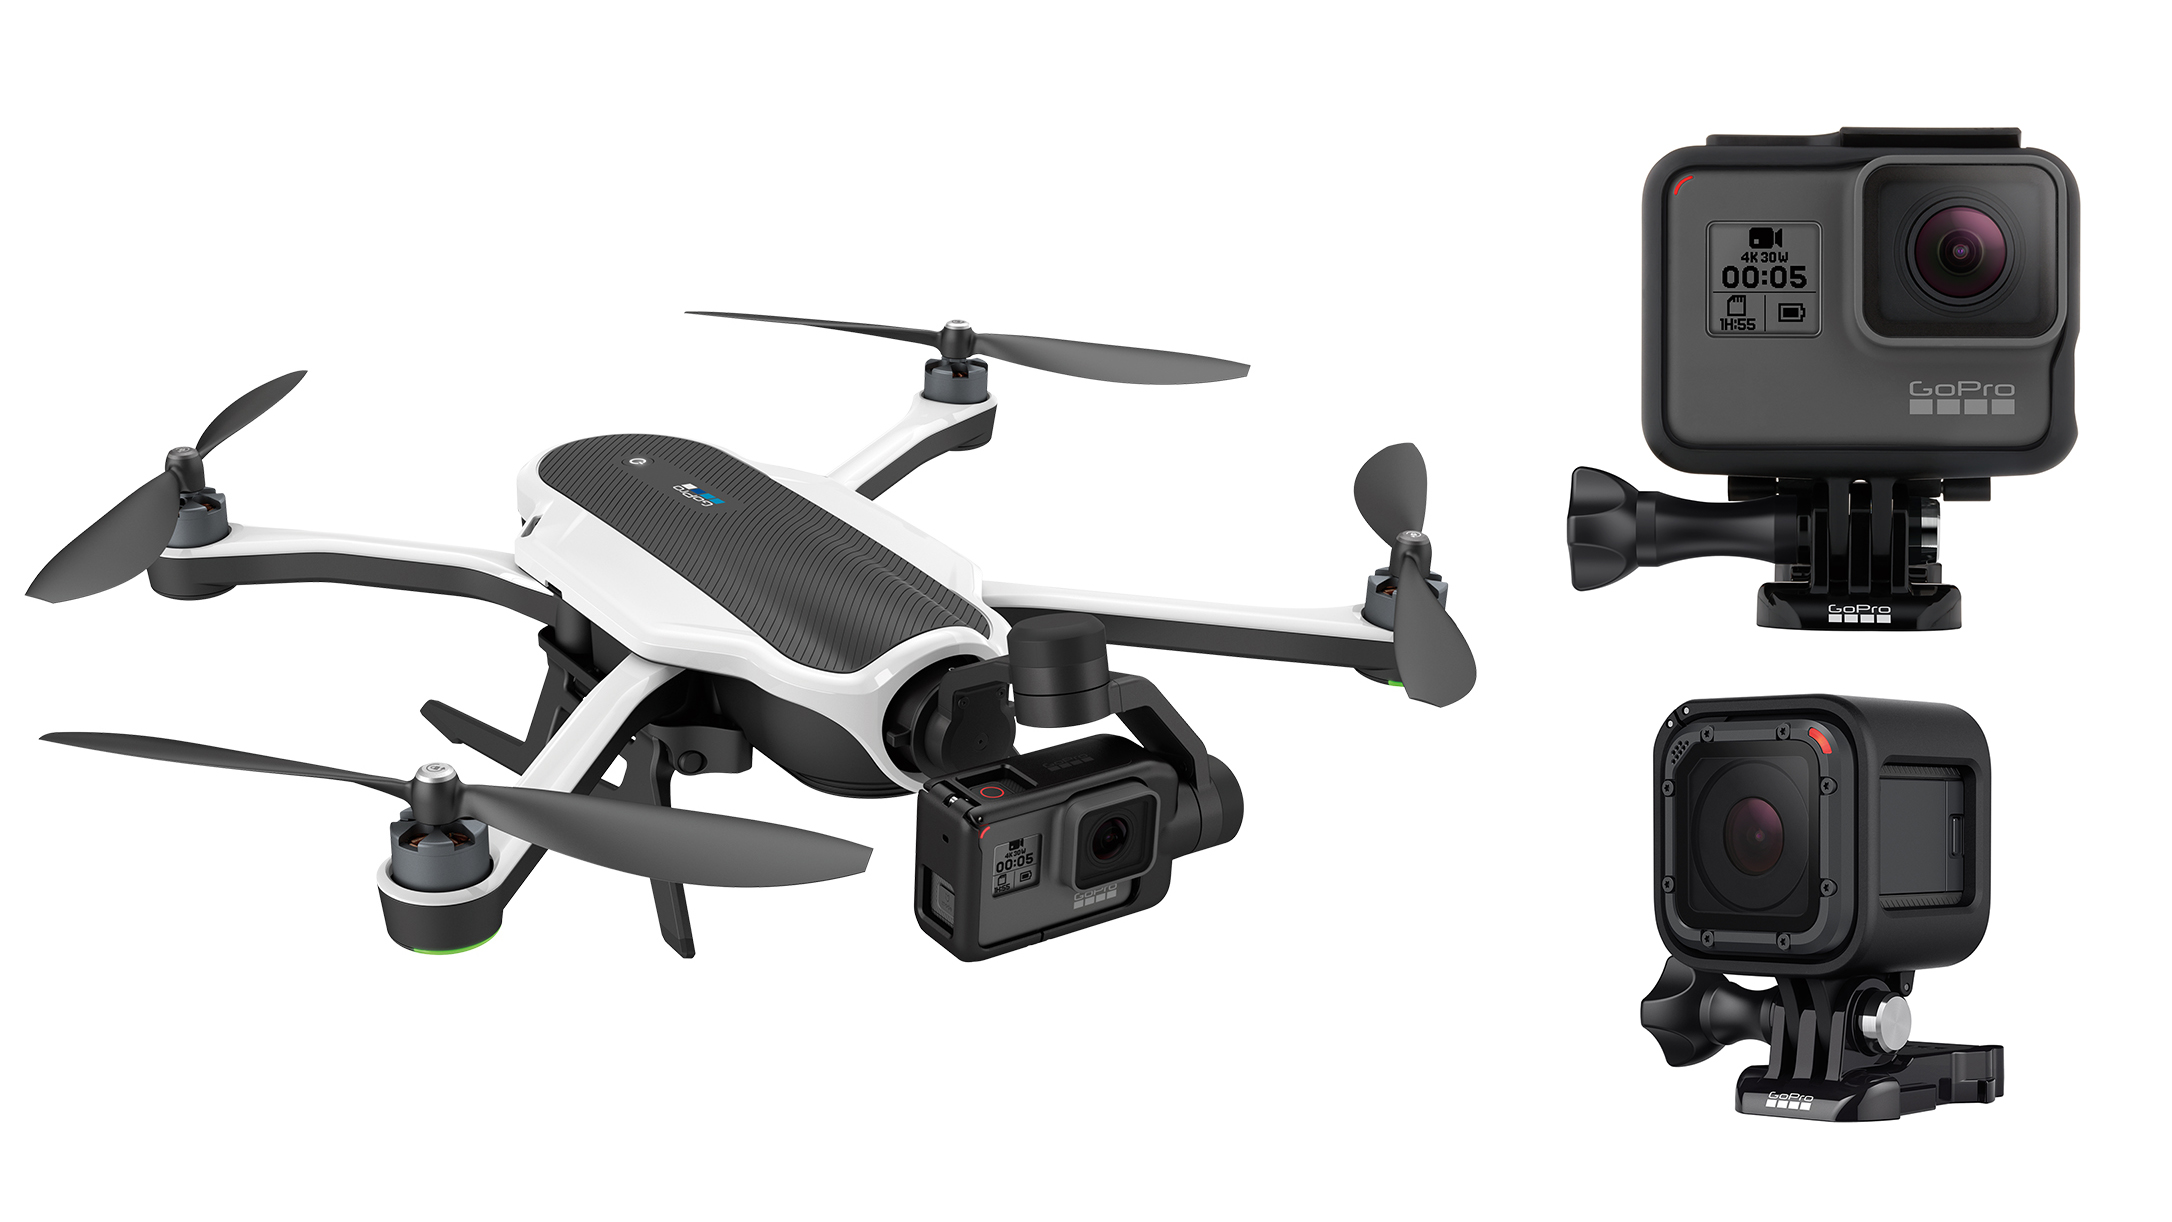 carpenter Thigh Search This is the GoPro Hero5 and Karma drone and their price | TechRadar